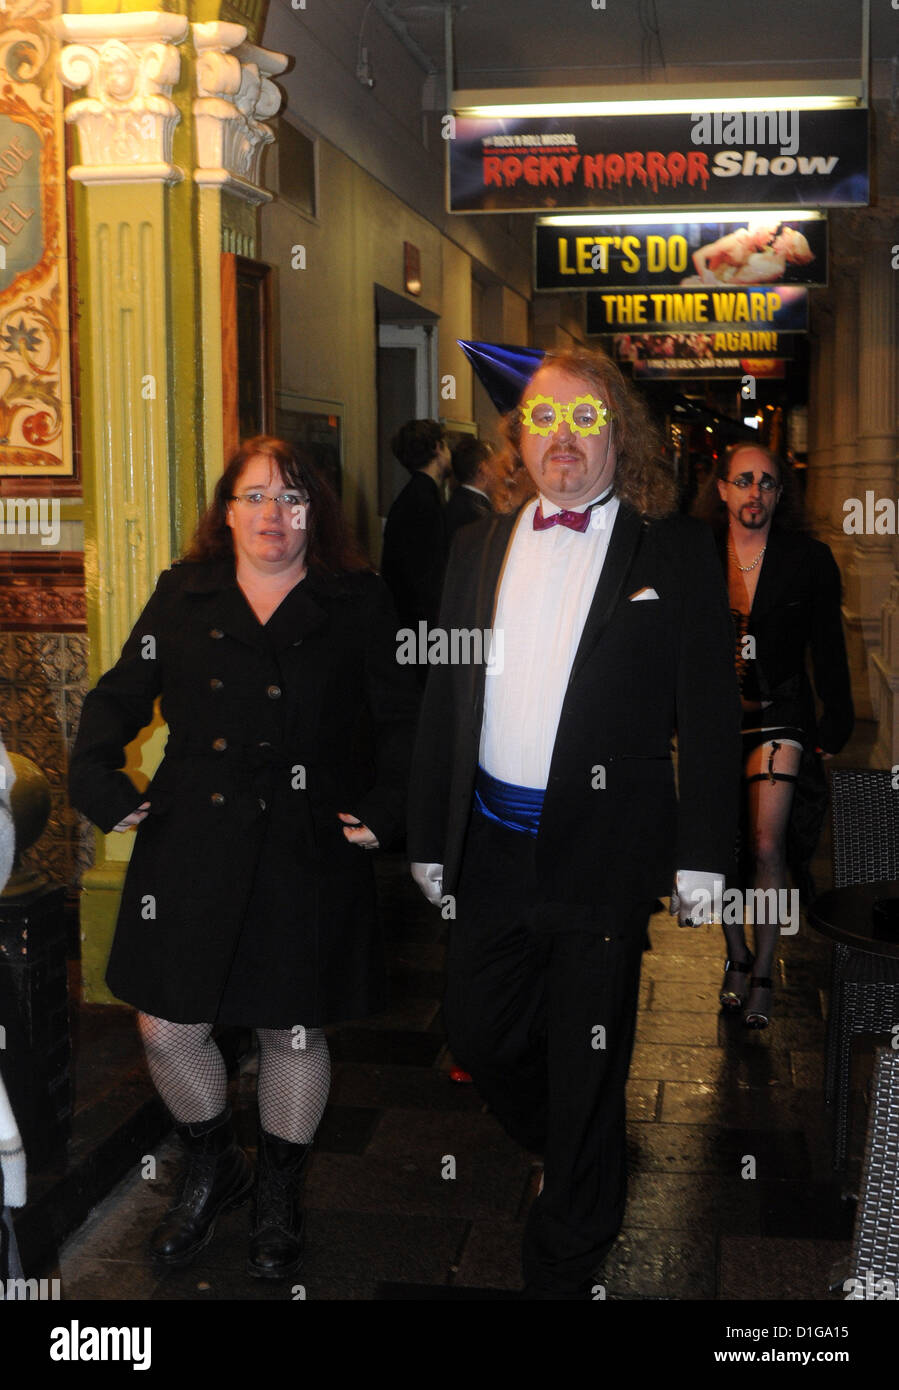 Theatre goers dressed up in traditional Rocky Horror Show outfits arrive for the first night of the UK tour at the Theatre Royal in Brighton. It is coming up for 40 years since the famous stage show was written by Richard O'Brien in 1973. Stock Photo